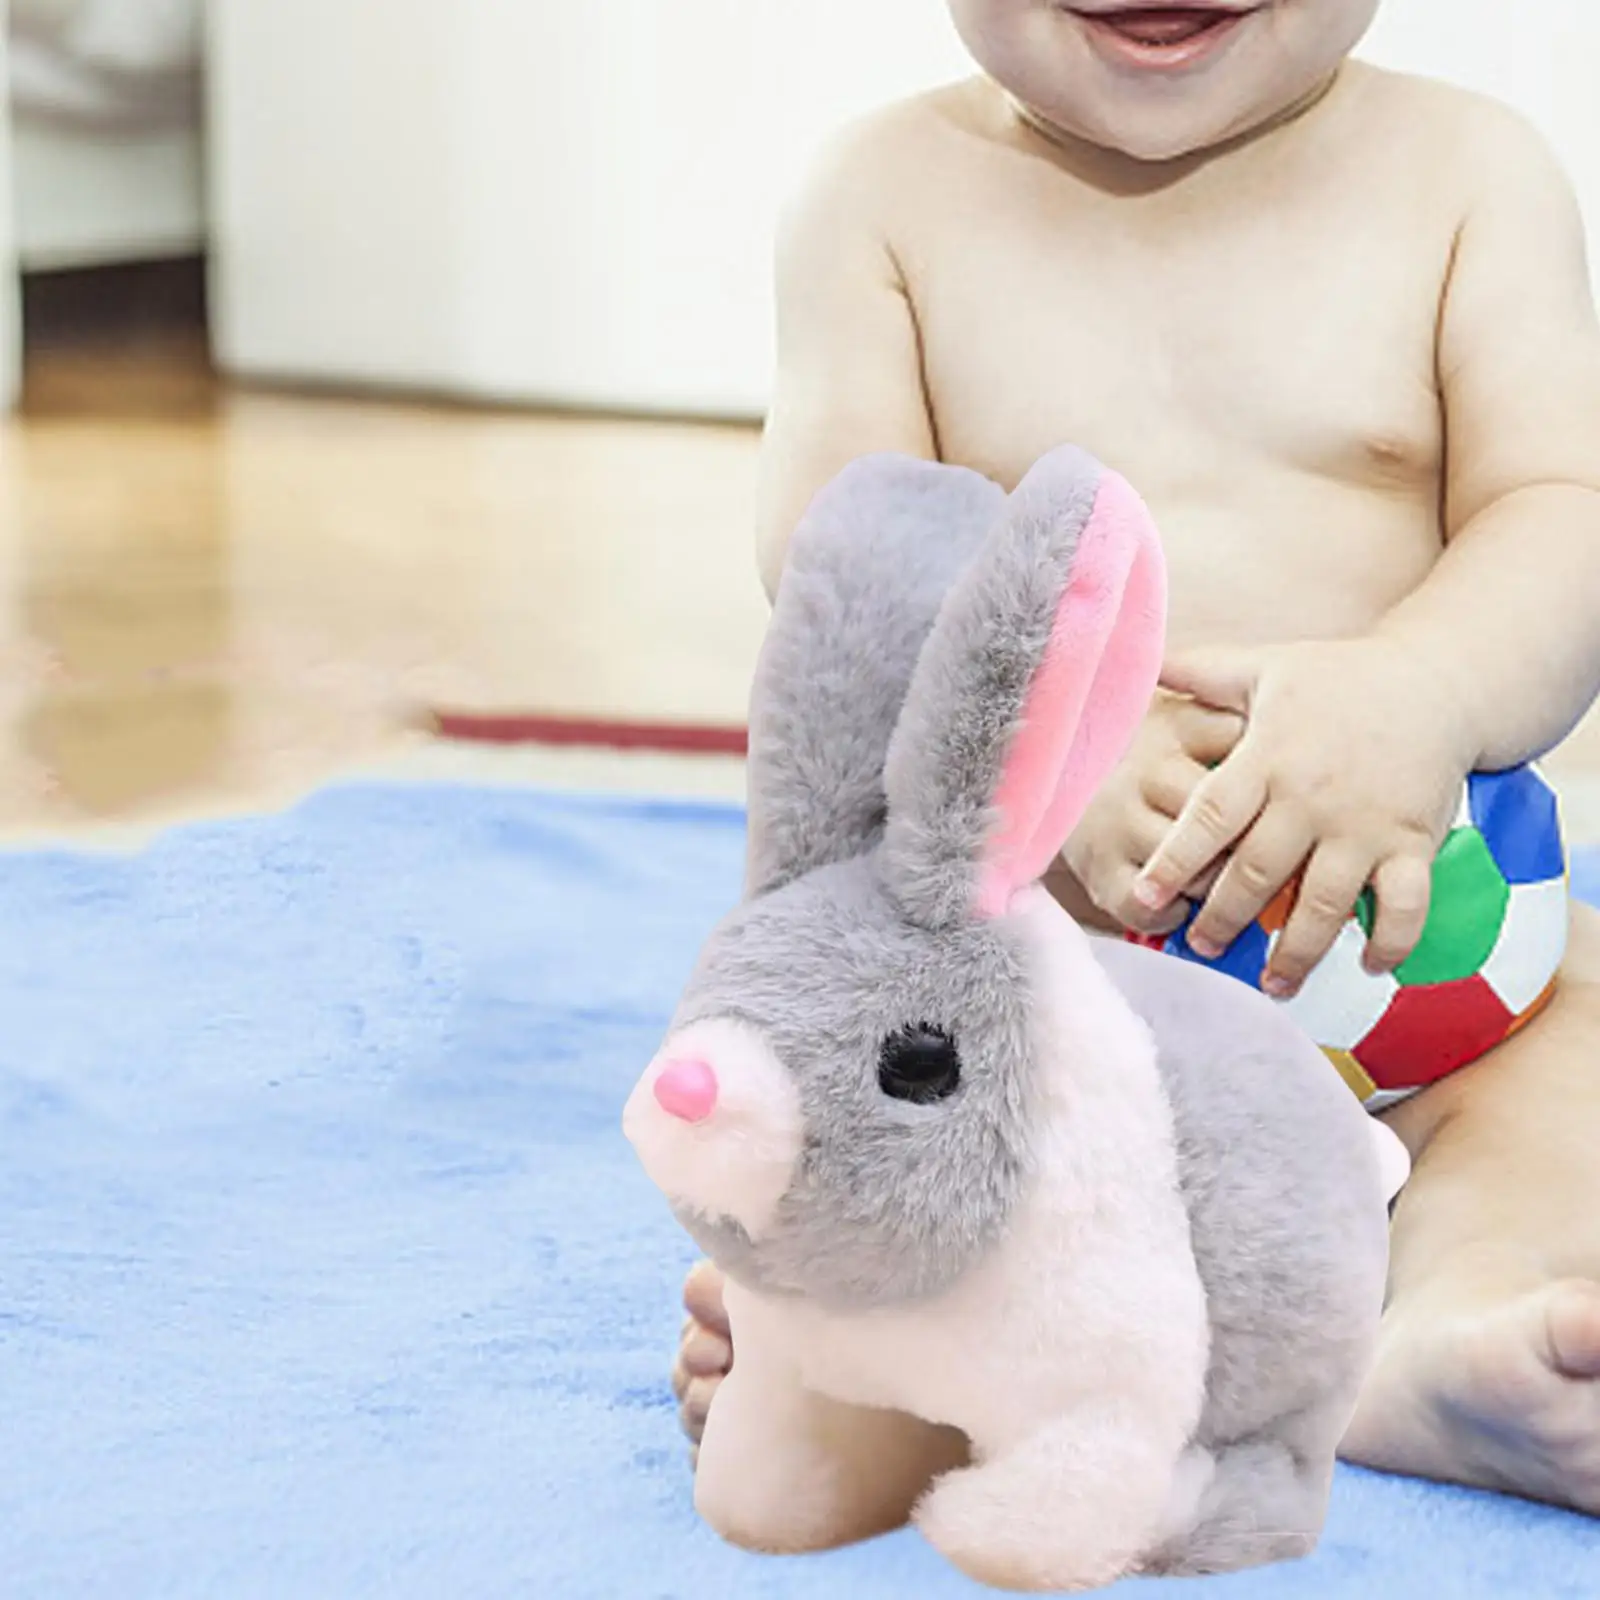 Electric Bunny Toys Wiggling Ears Early Education Novelty for Bedtime Friend